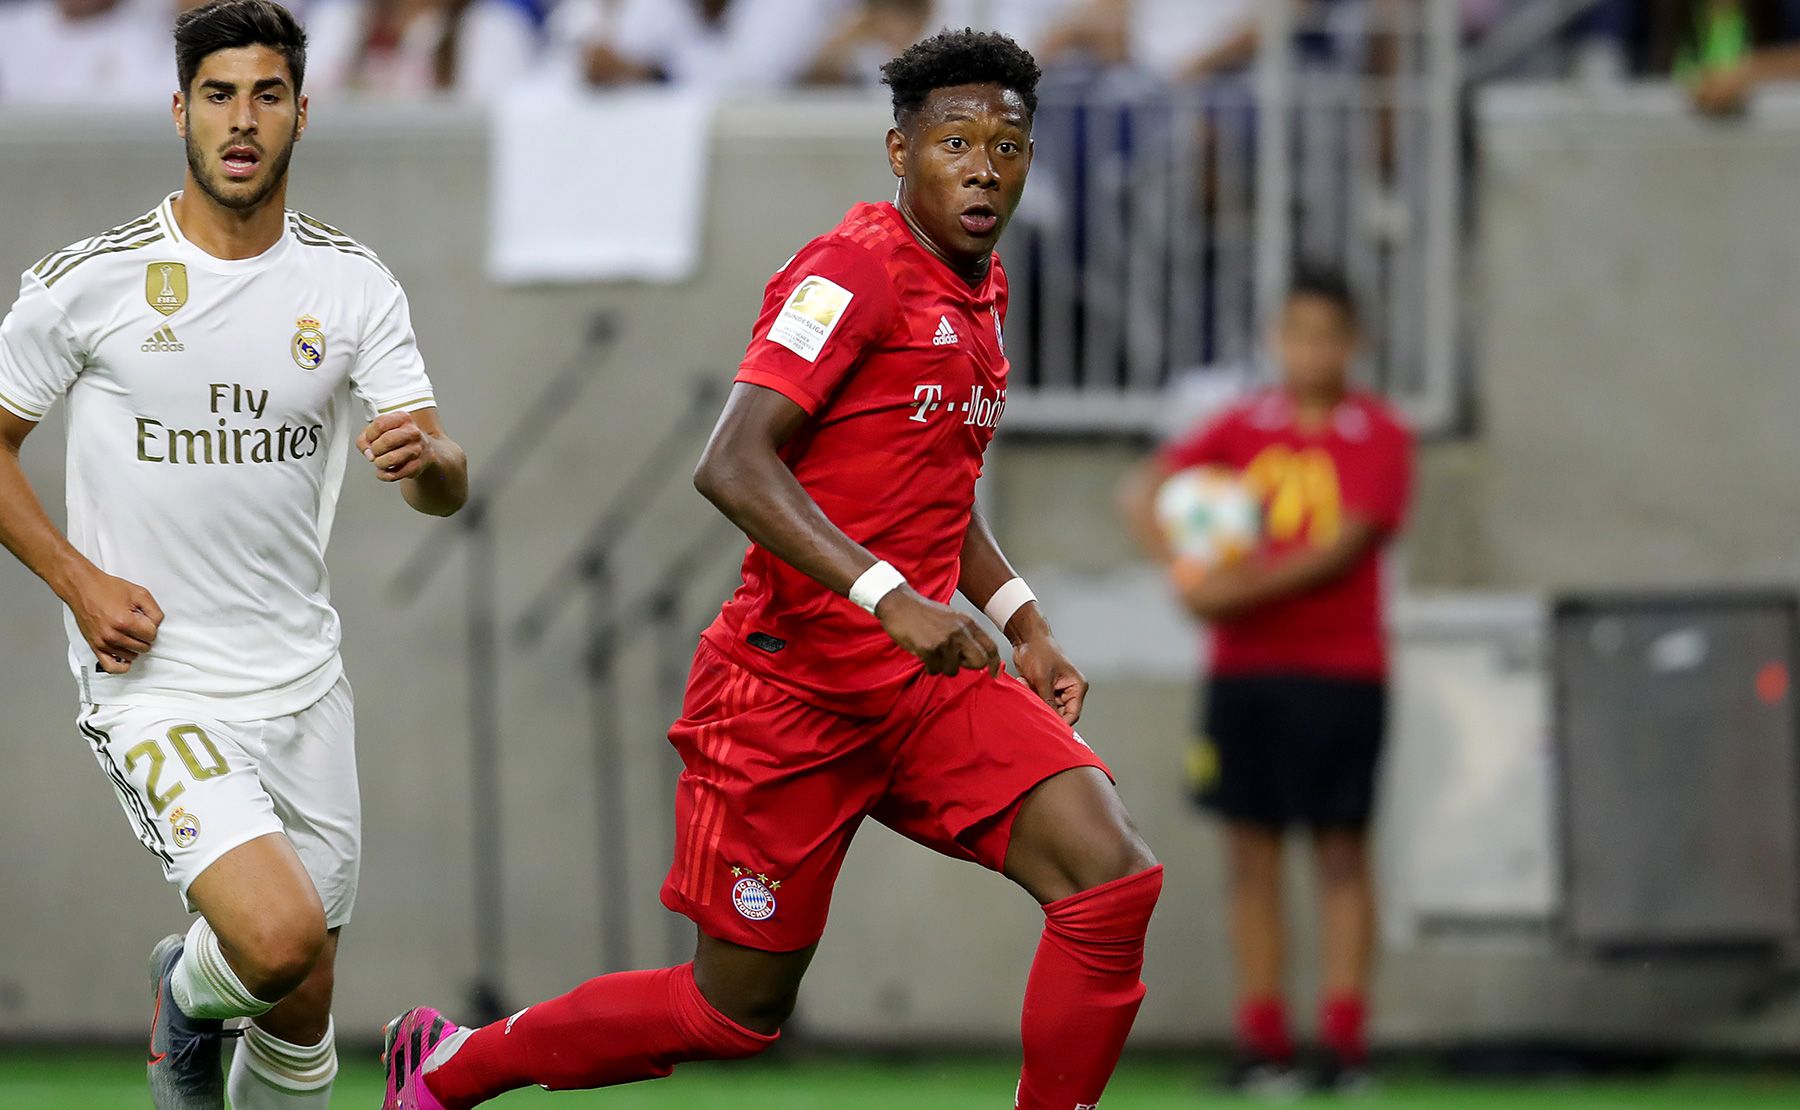 David Alaba in the match against Real Madrid